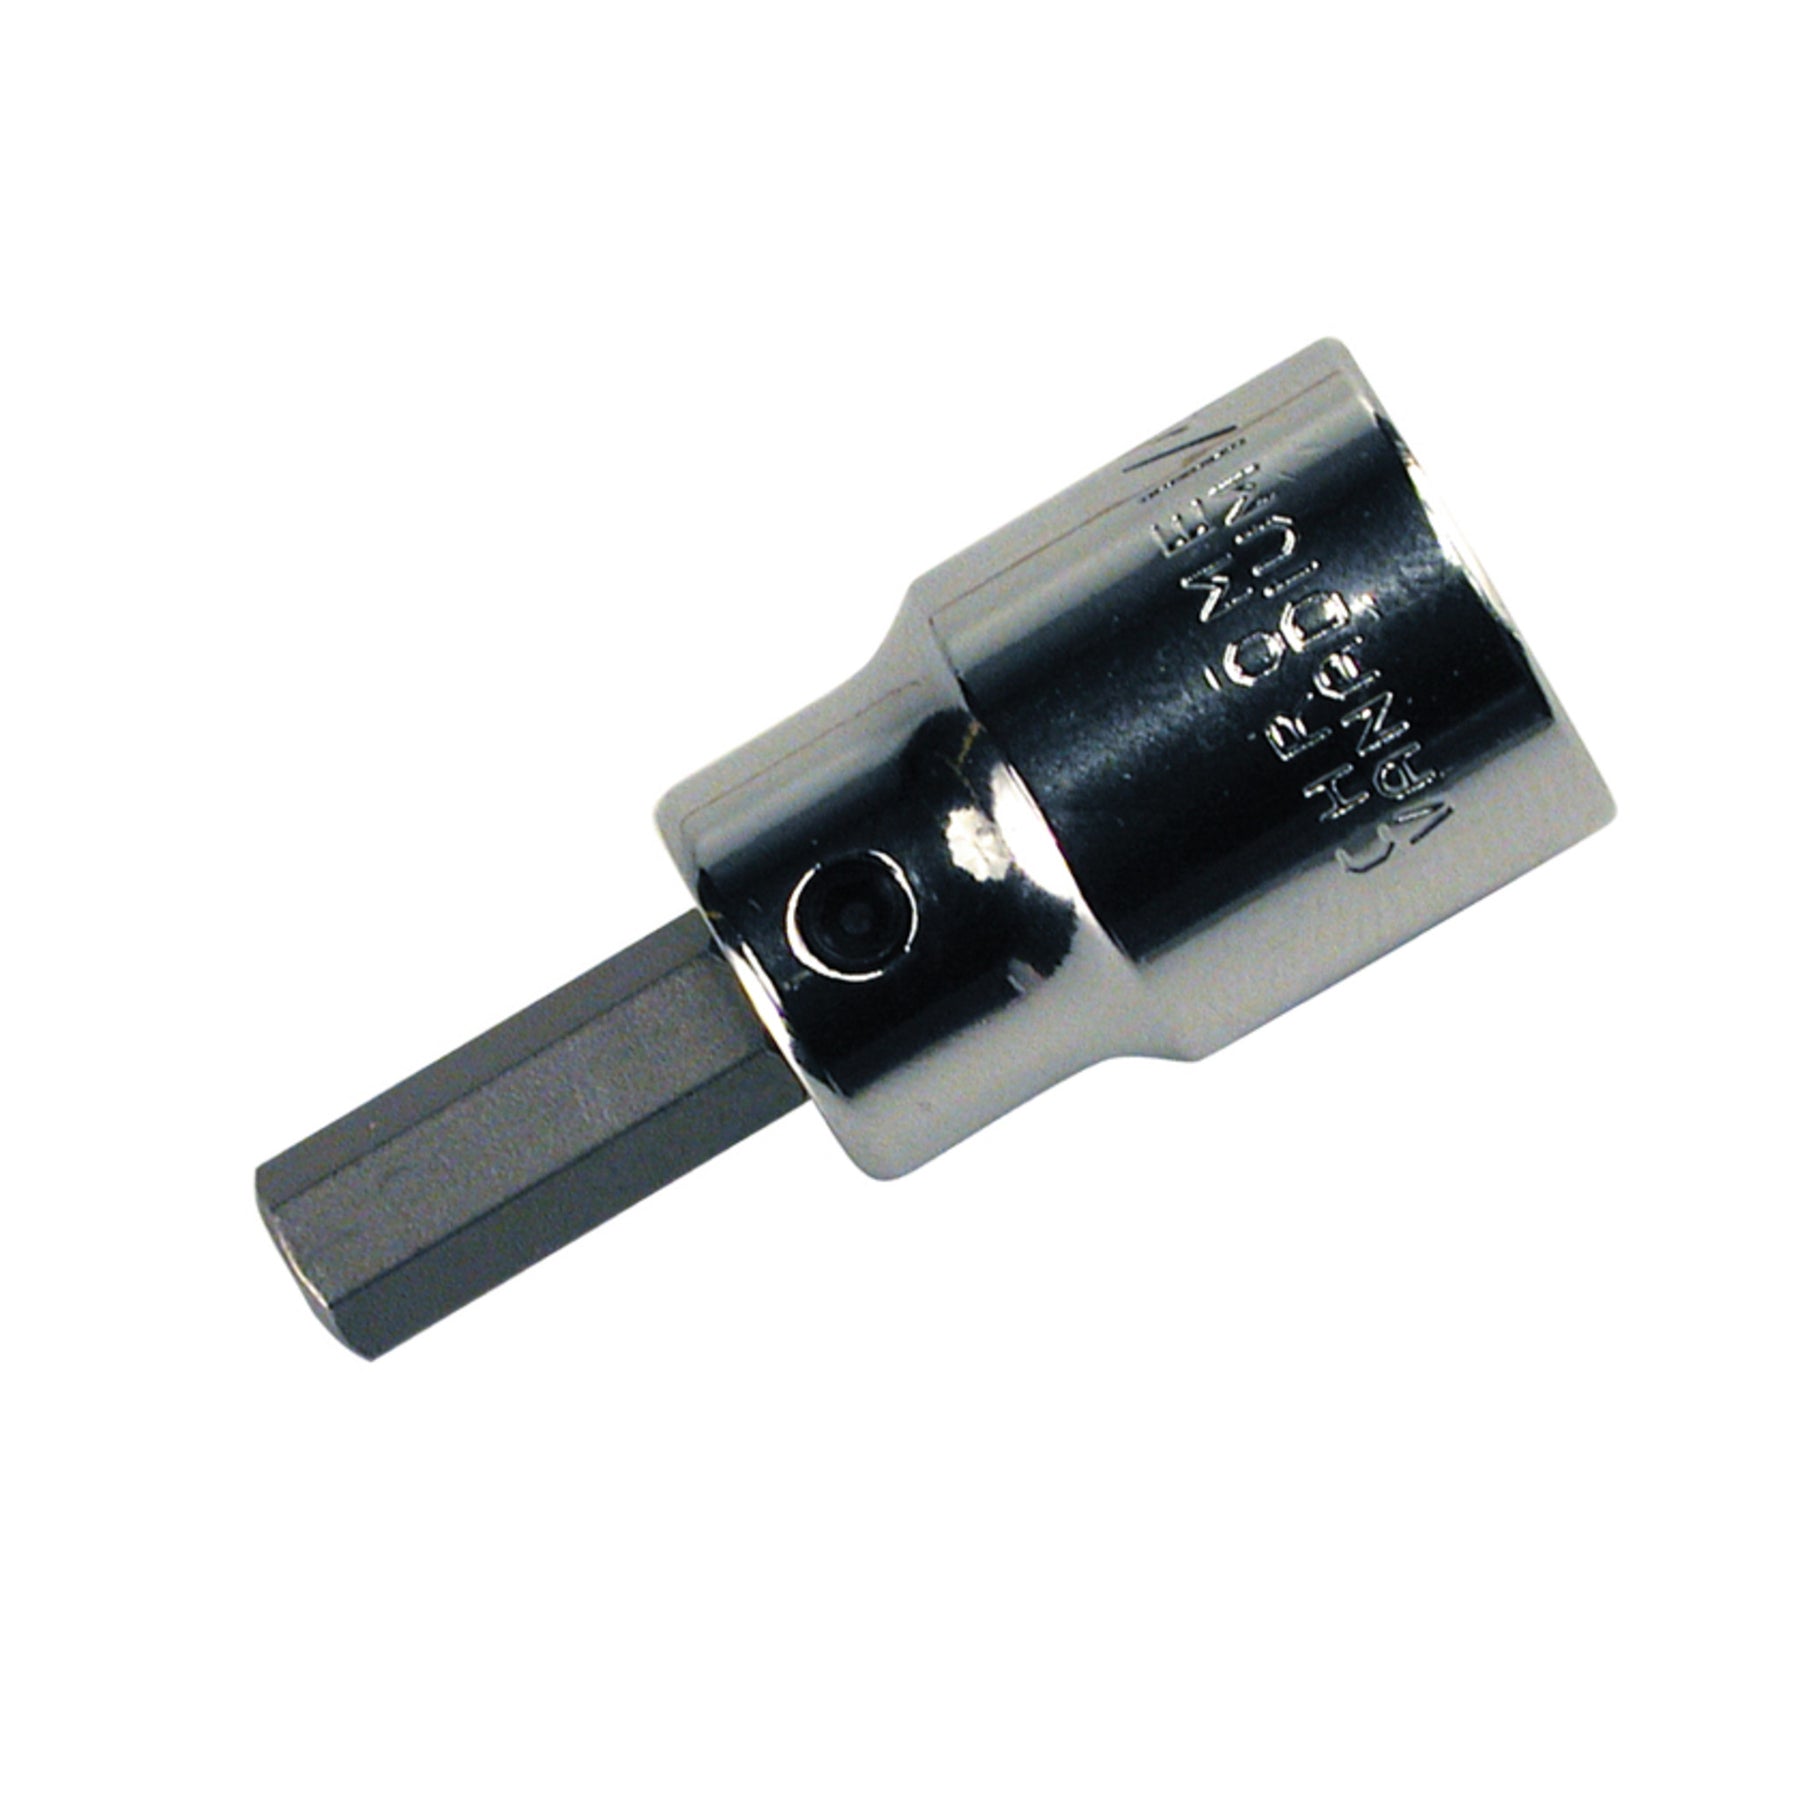 Security Hex BitSocket 3/8" Drive 9/64"